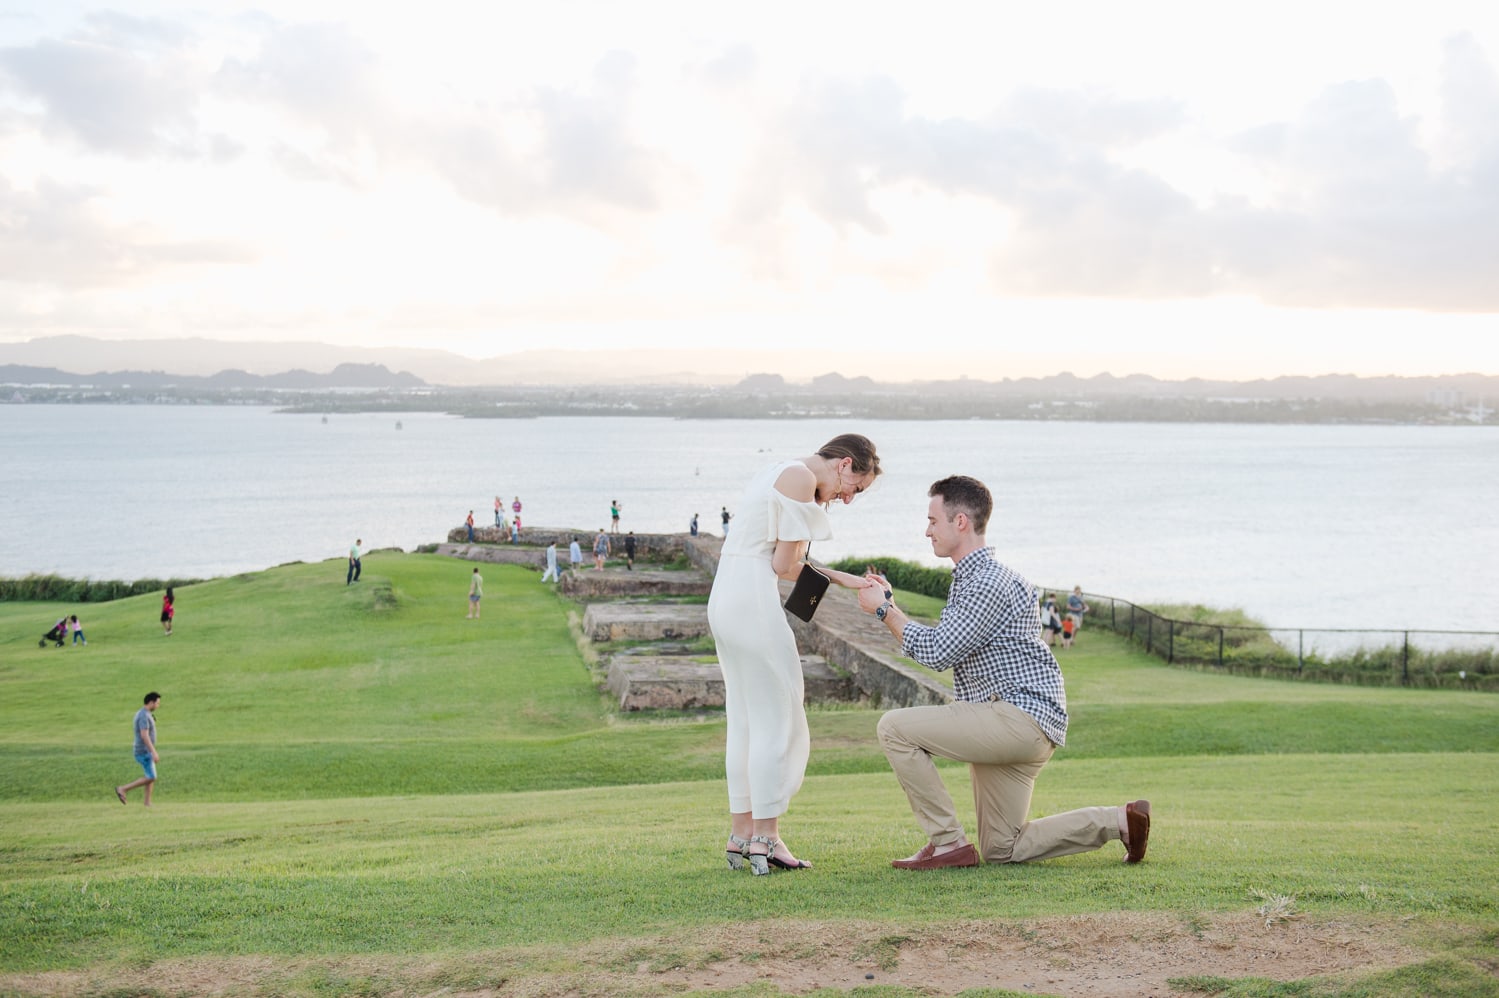 beautiful and simple marriage proposal in Old San Juan Puerto Rico by Camille Fontanez